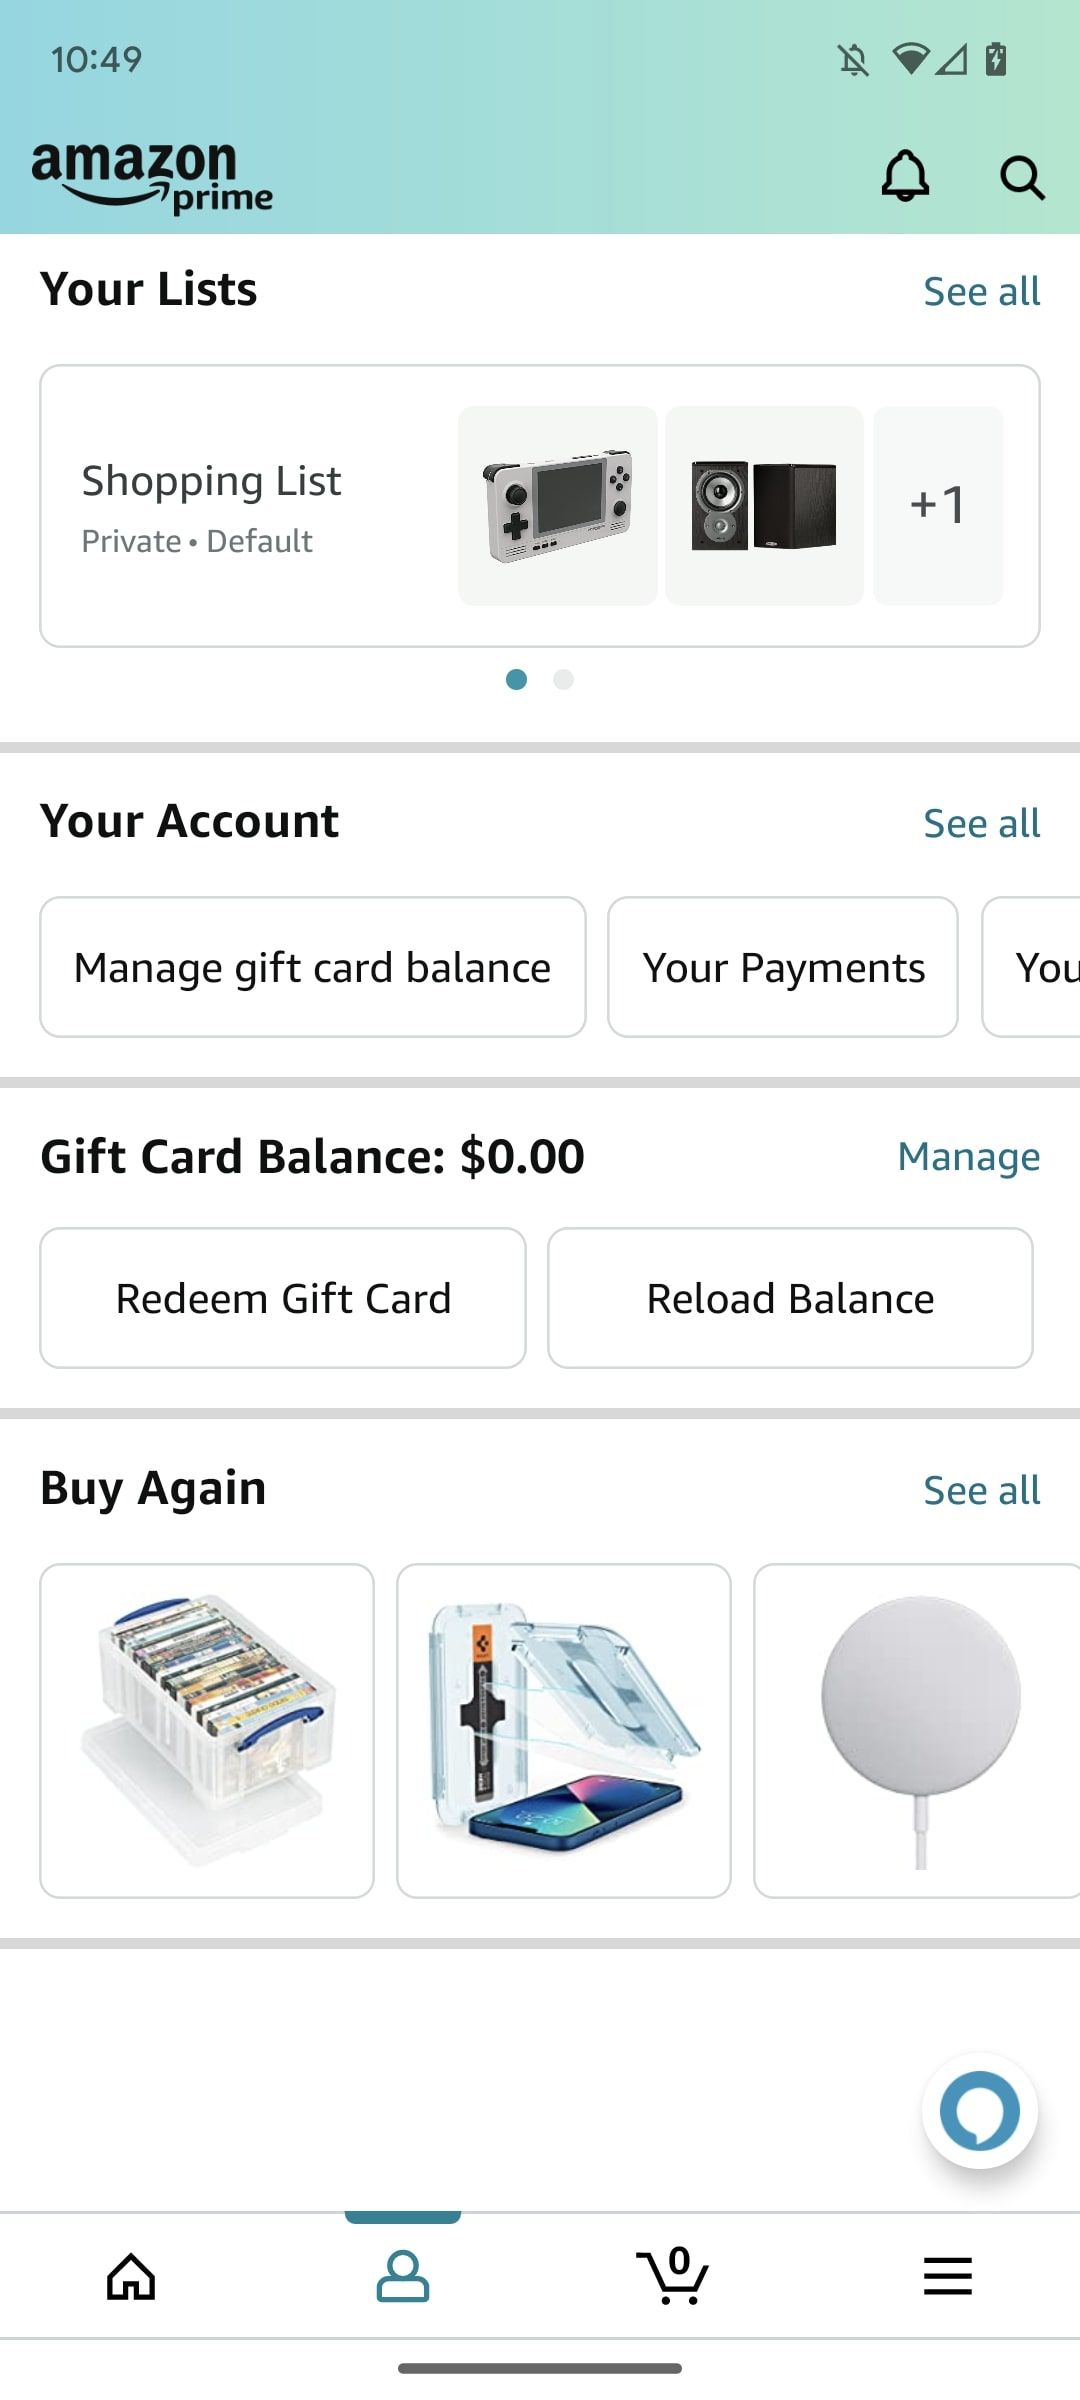 How to Transfer Amazon Gift Card Balance to Another Account - YouTube